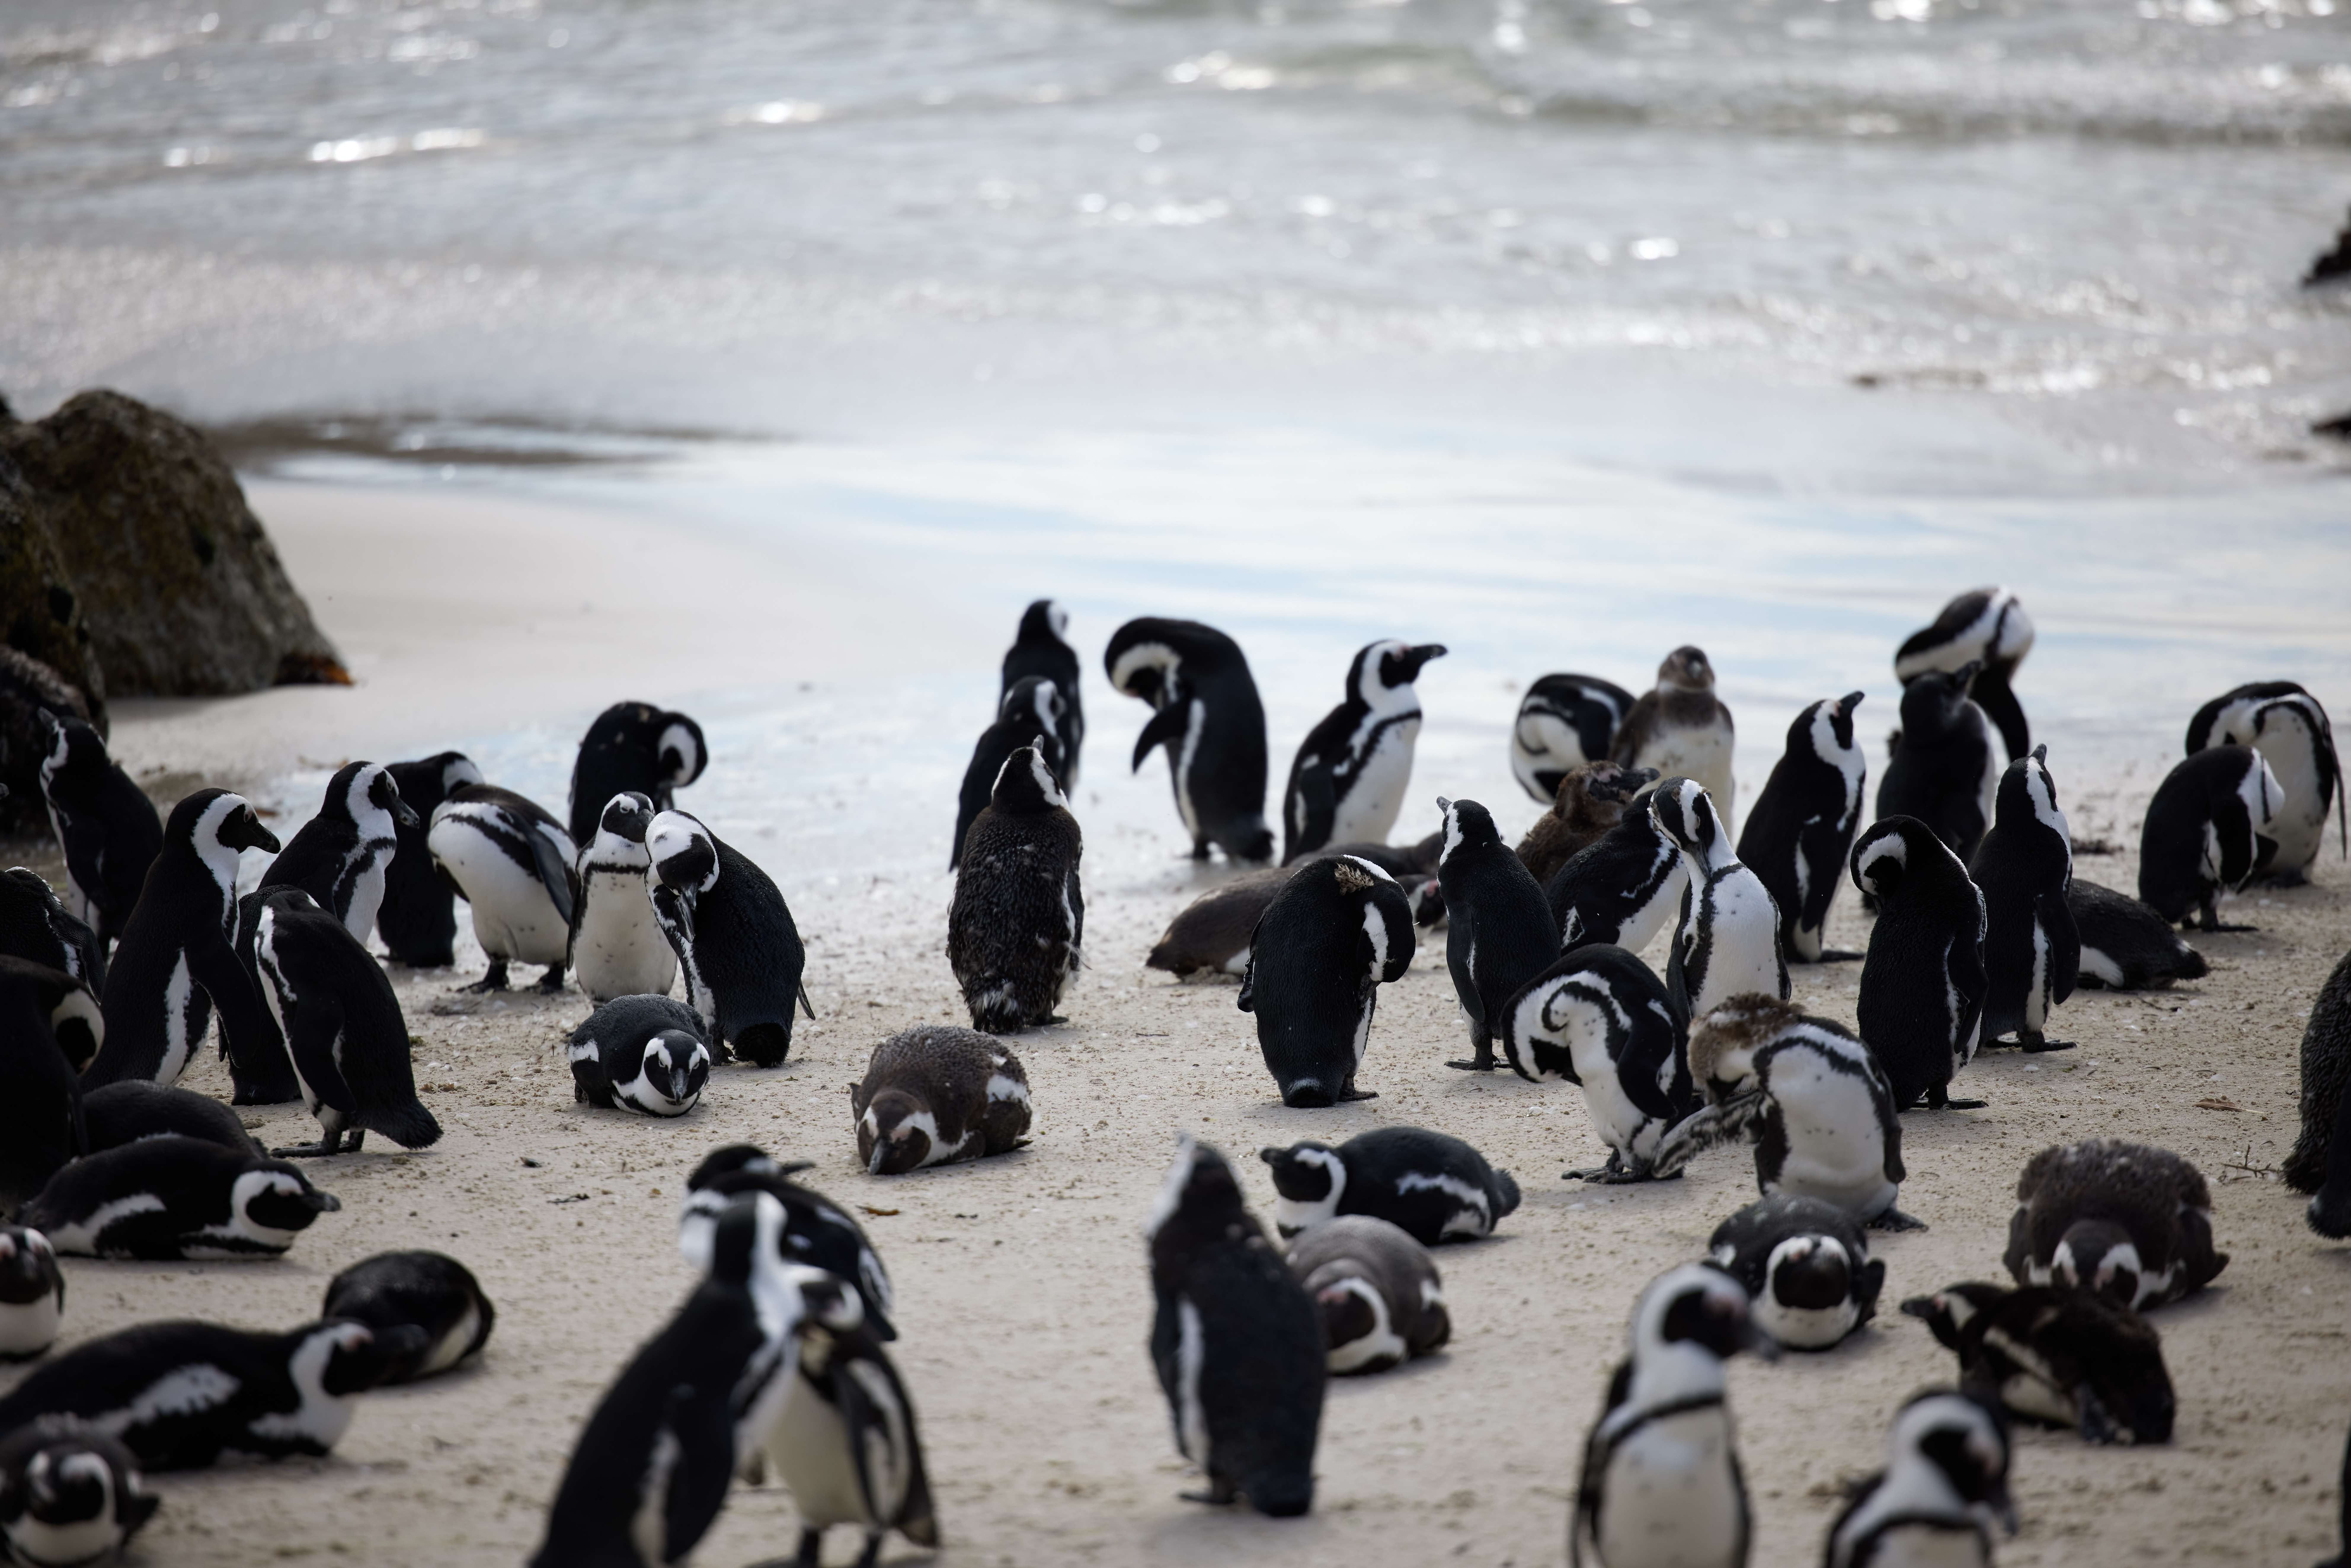 Shot of penguins at Boulders Beach in Cape Town, South Africa.
